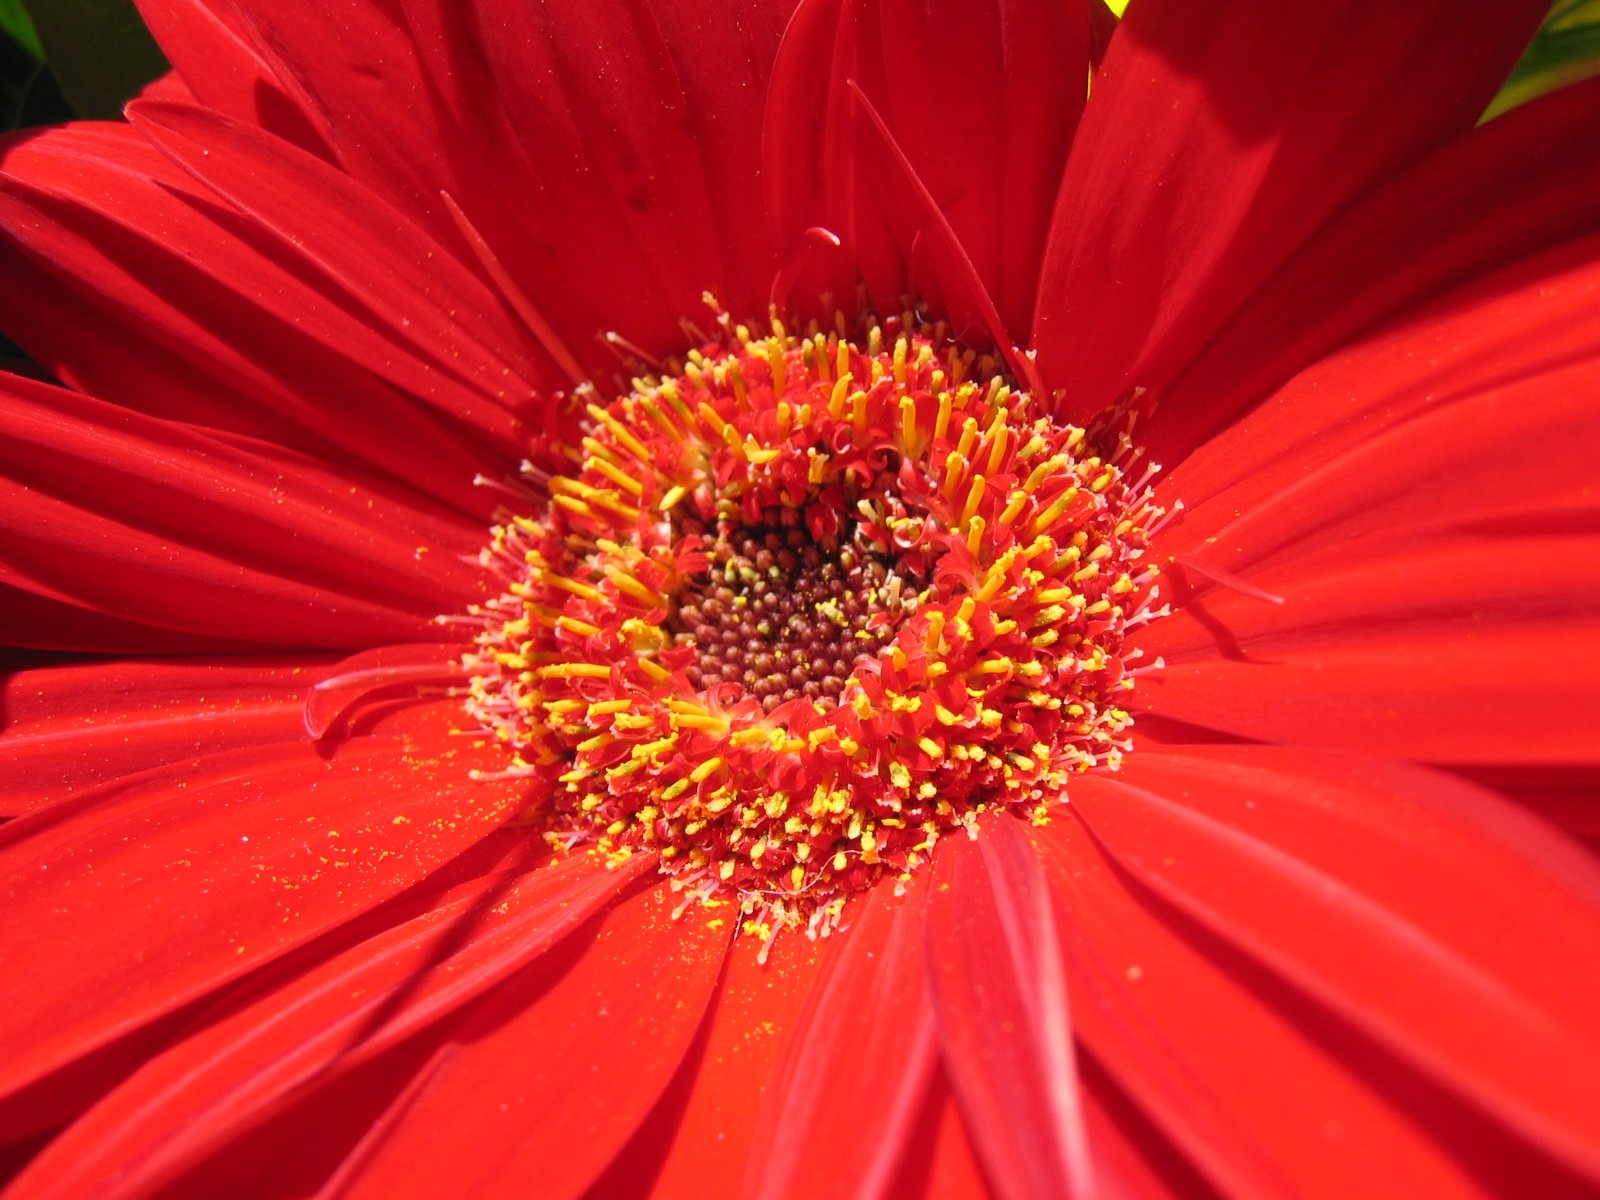 red flower with yellow centers in the center